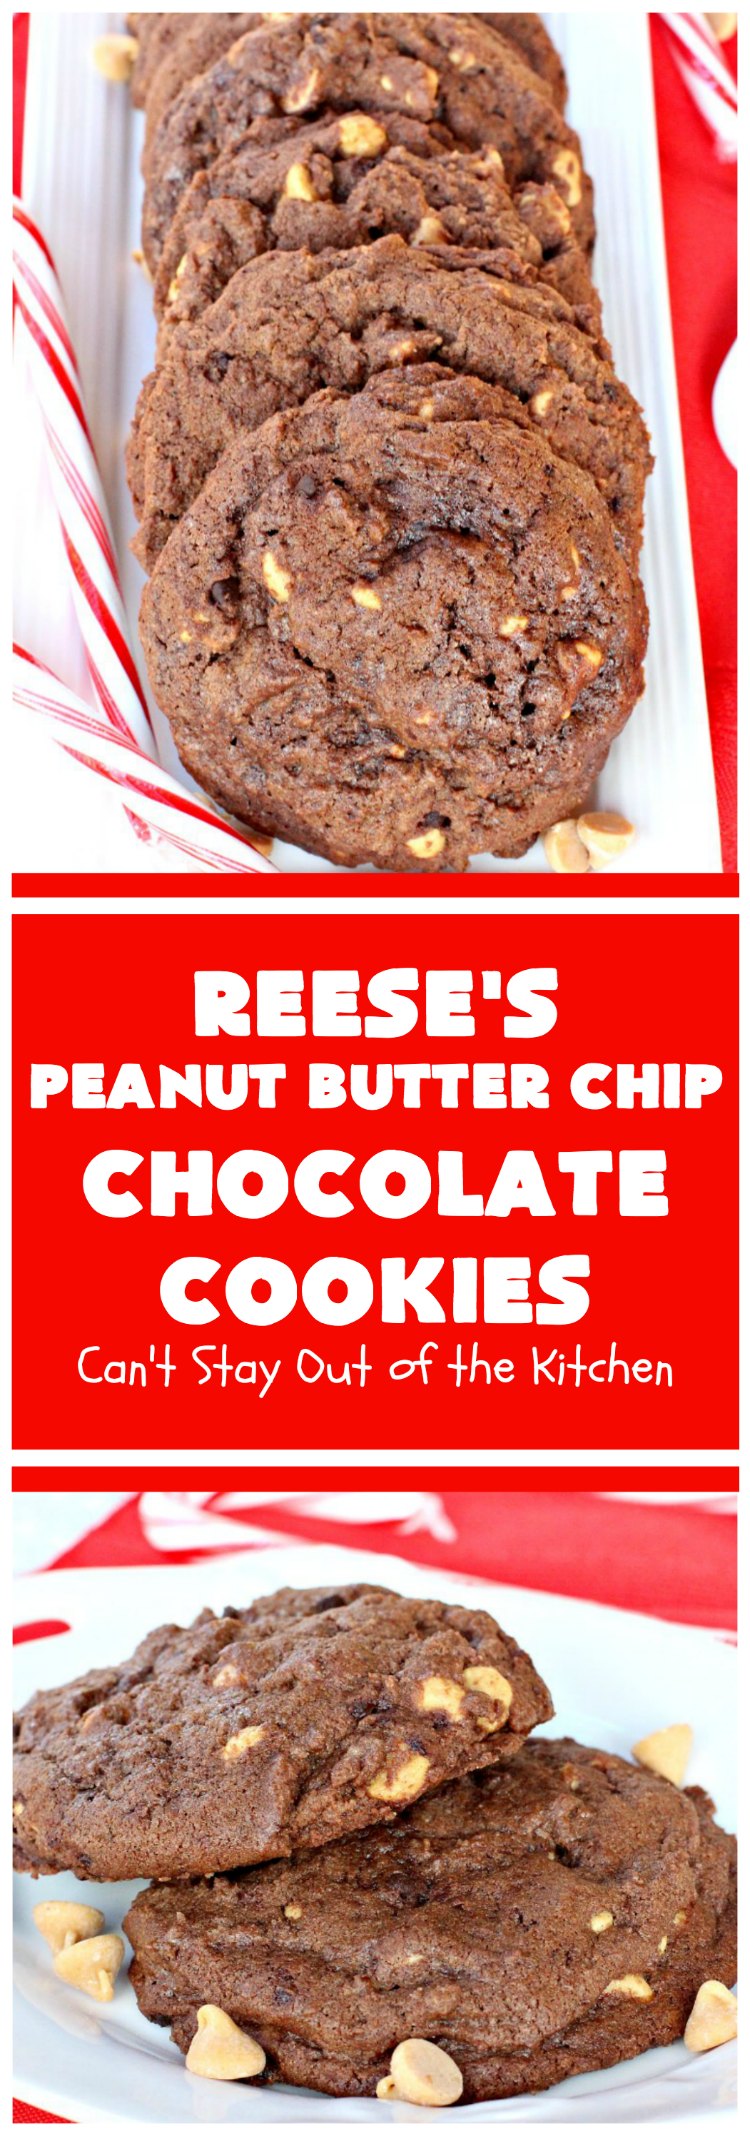 Reese's Peanut Butter Chip Chocolate Cookies | Can't Stay Out of the KitchenReese's Peanut Butter Chip Chocolate Cookies | Can't Stay Out of the Kitchen